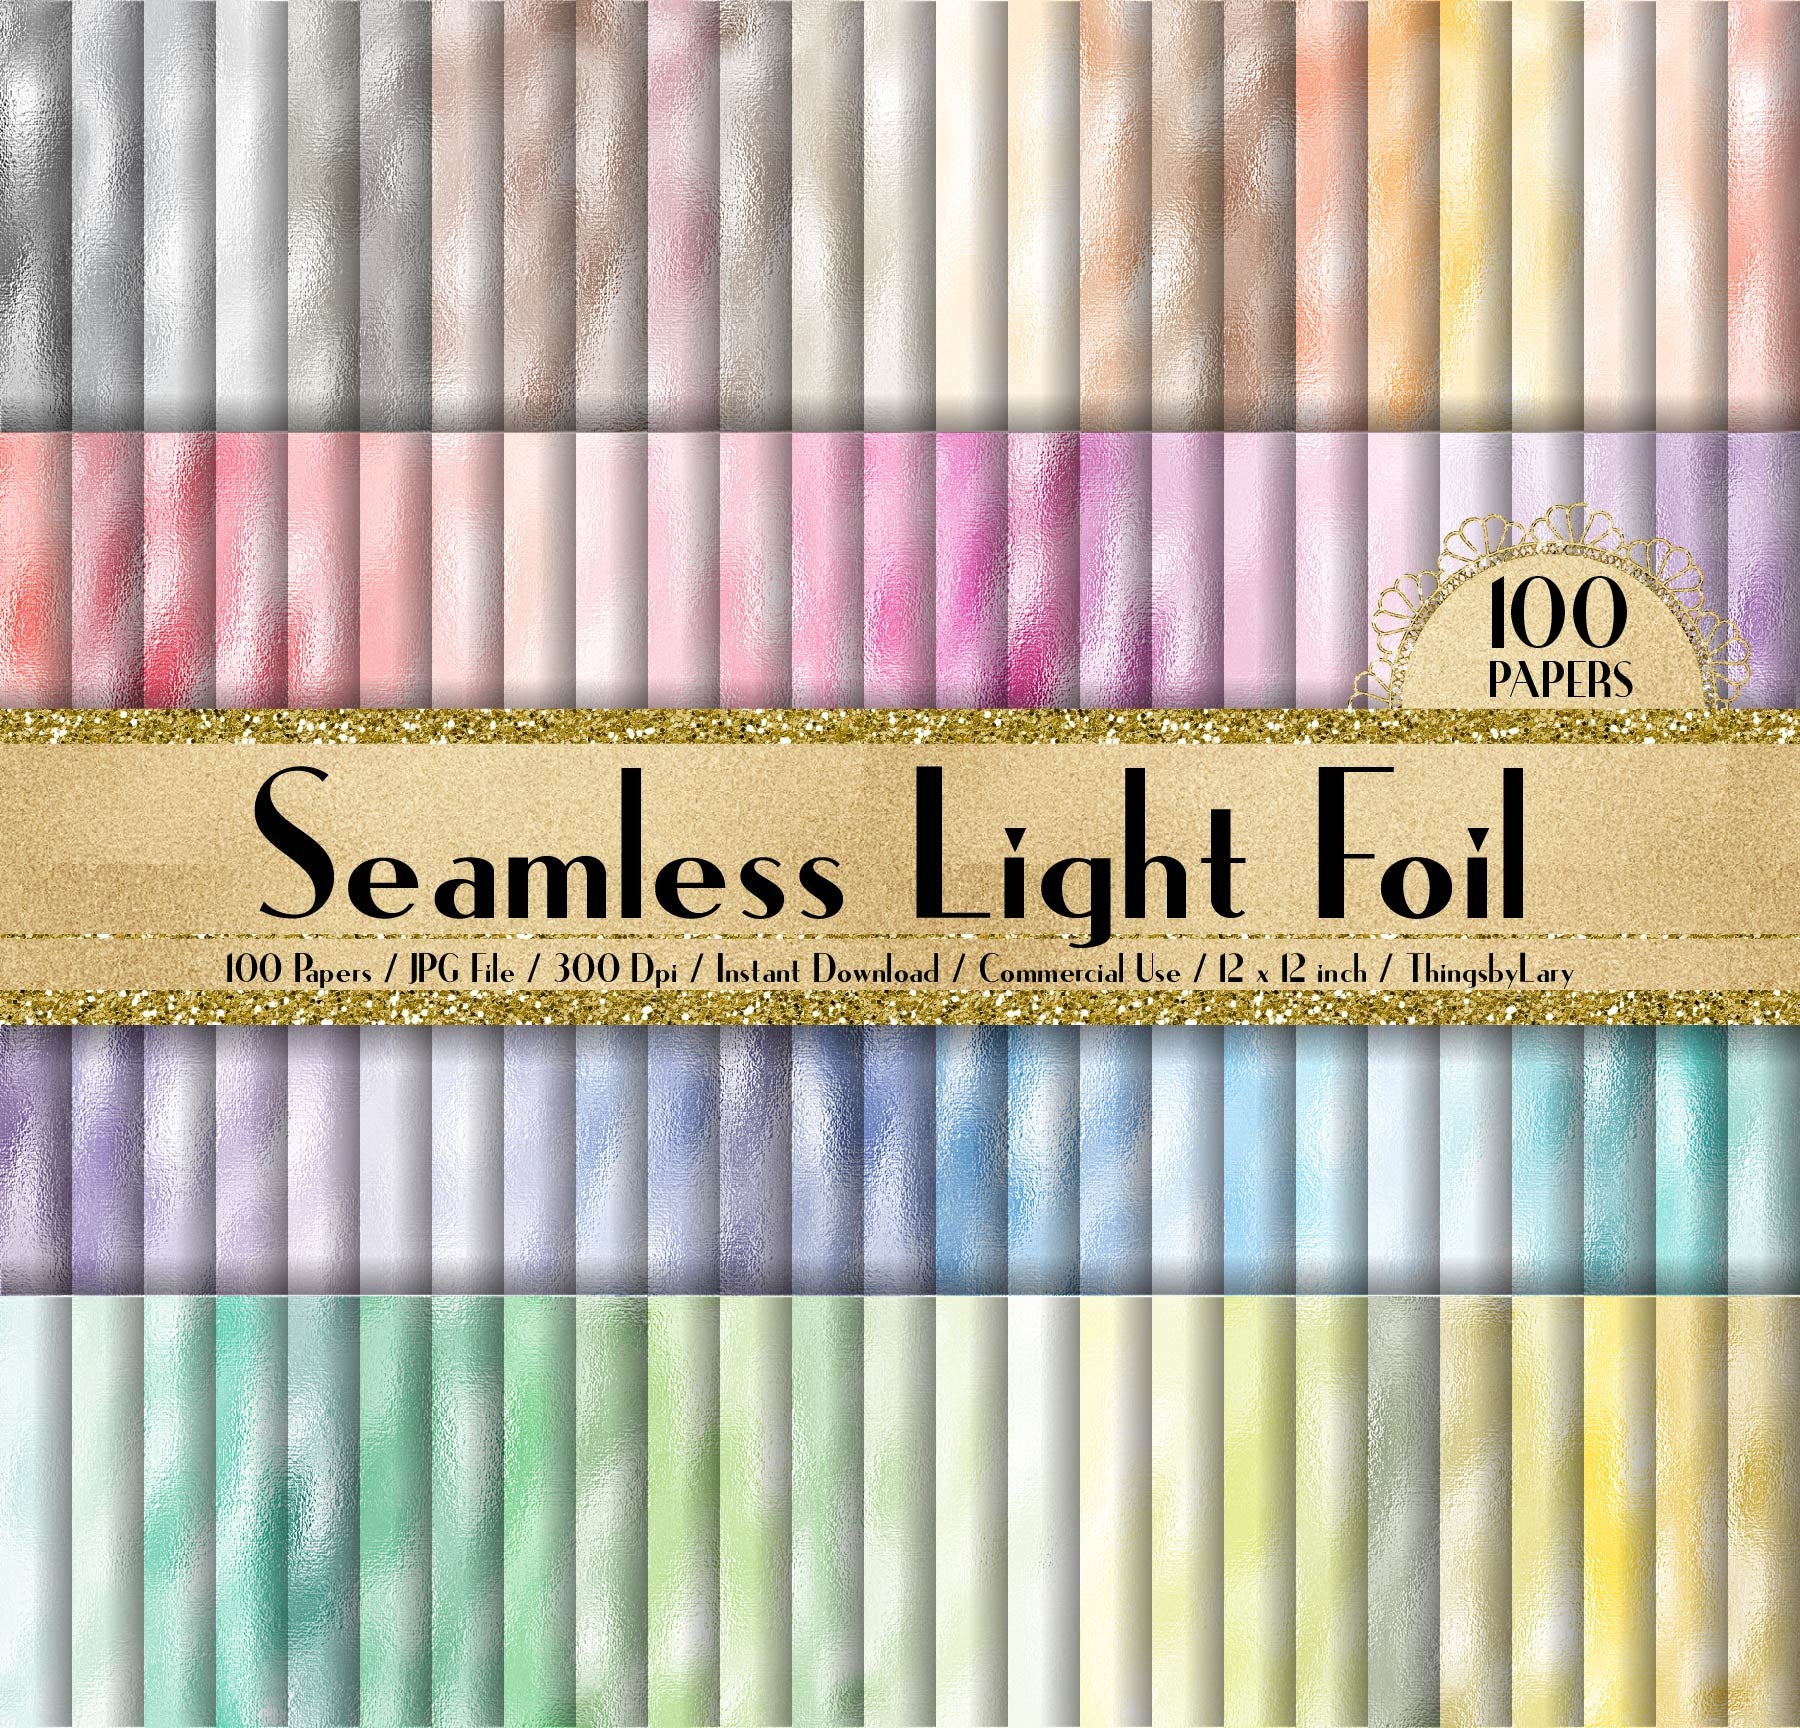 100 Seamless Light Foil Papers 12 inch 300 Dpi Instant Download Commercial Use, Planner Paper, Scrapbooking Luxury Kit, Foil Papers Seamless